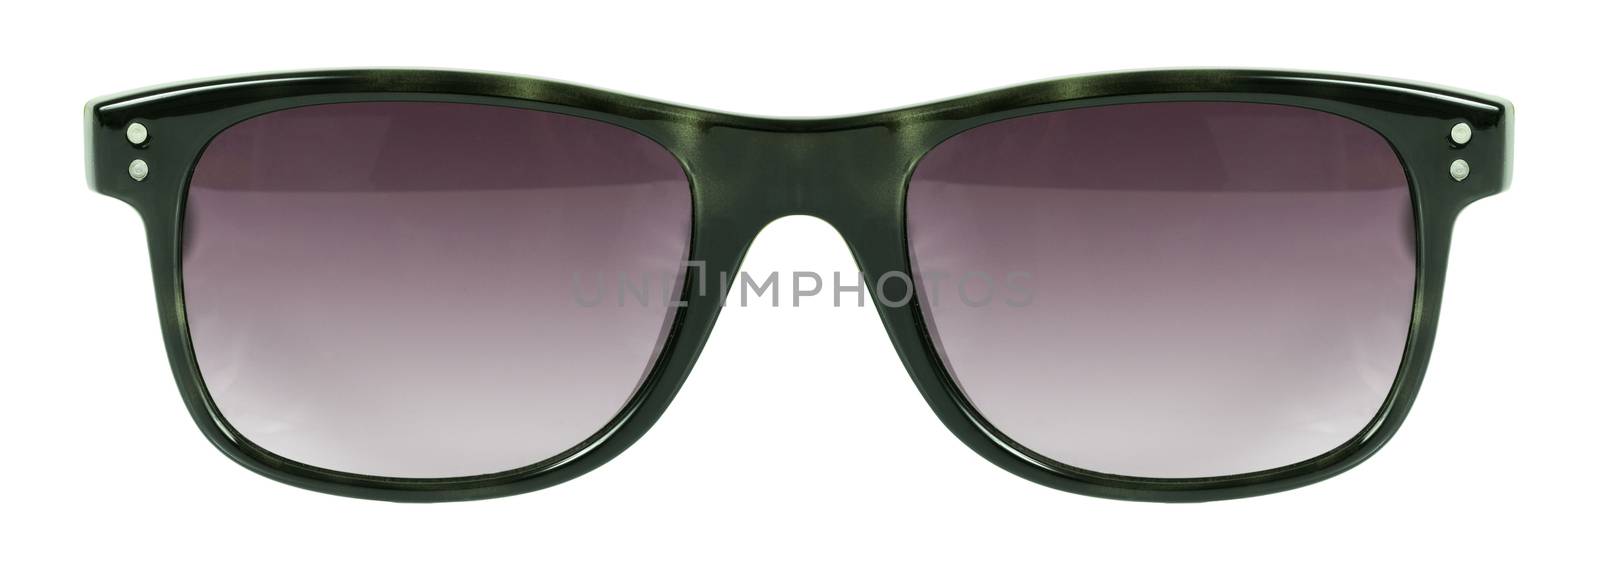 Sunglasses green frame and red color lens isolated against a clean white background nobody